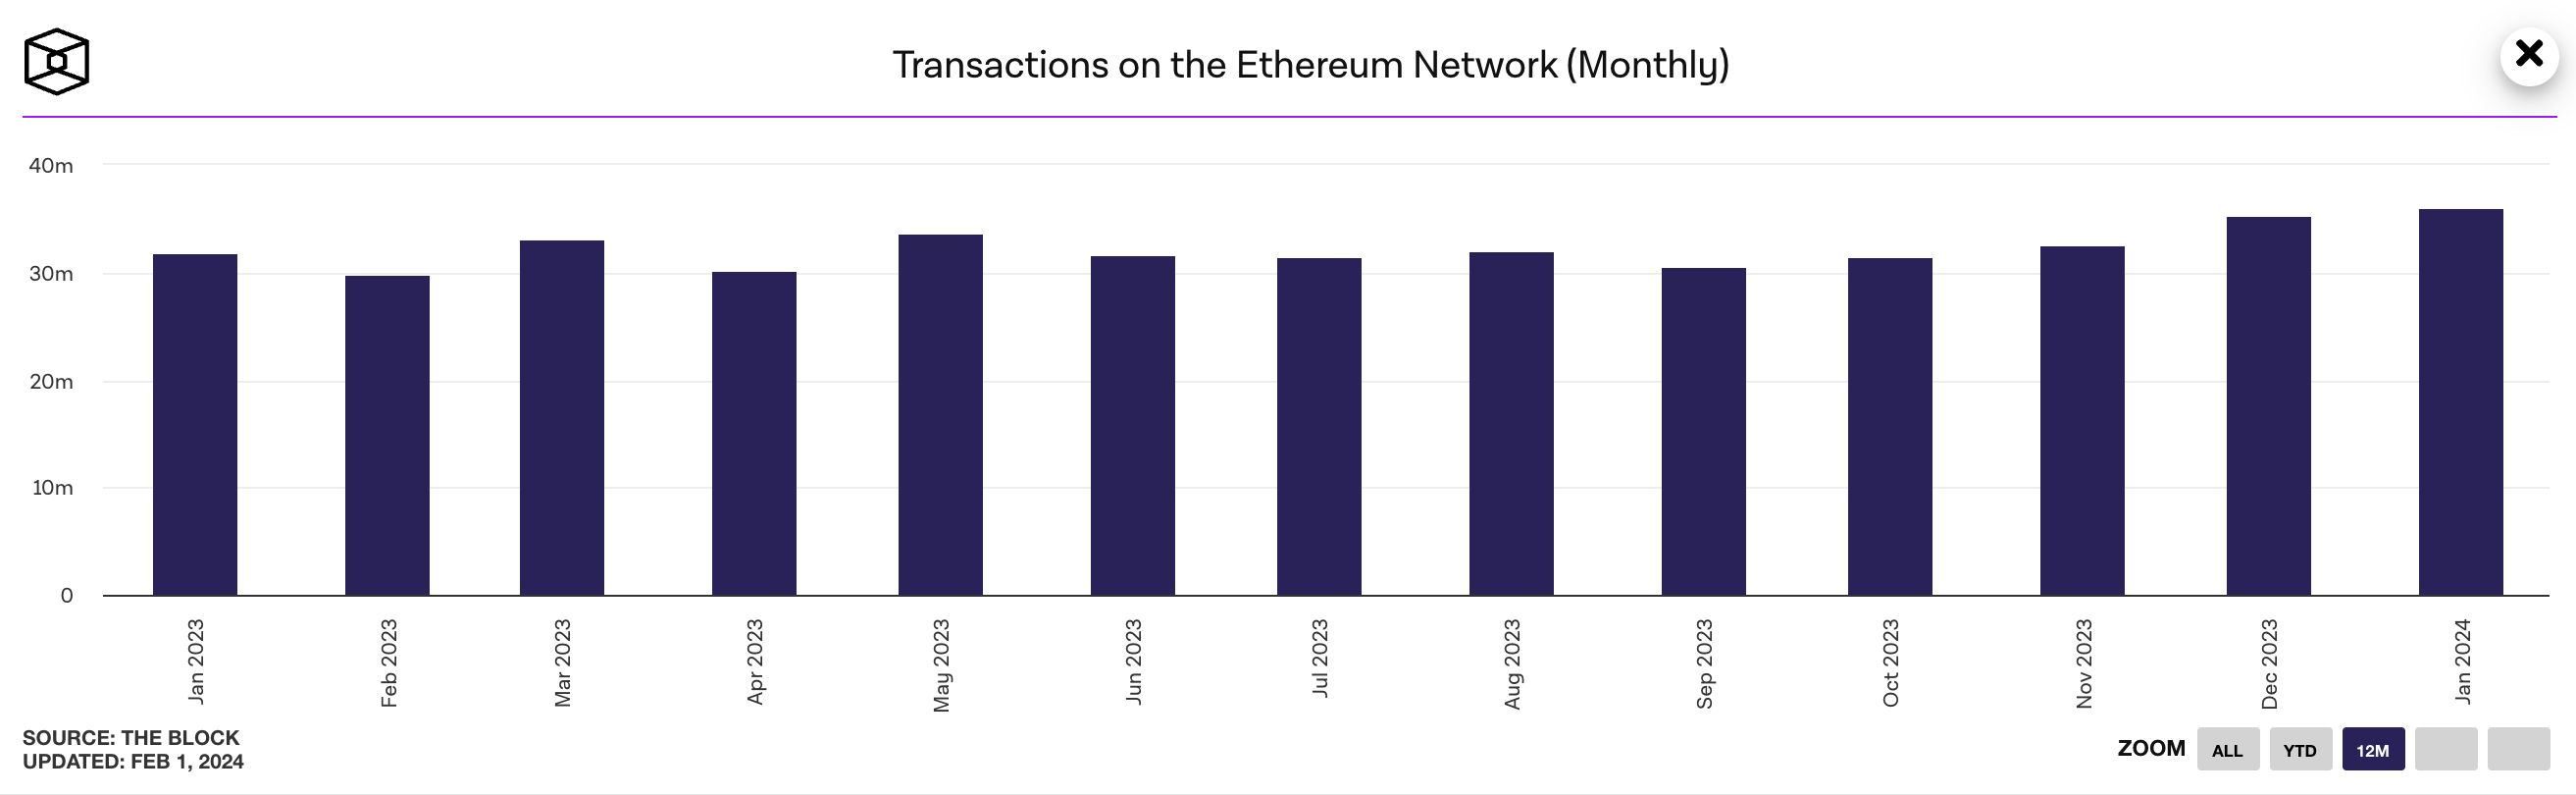 Ethereum monthly transaction count 